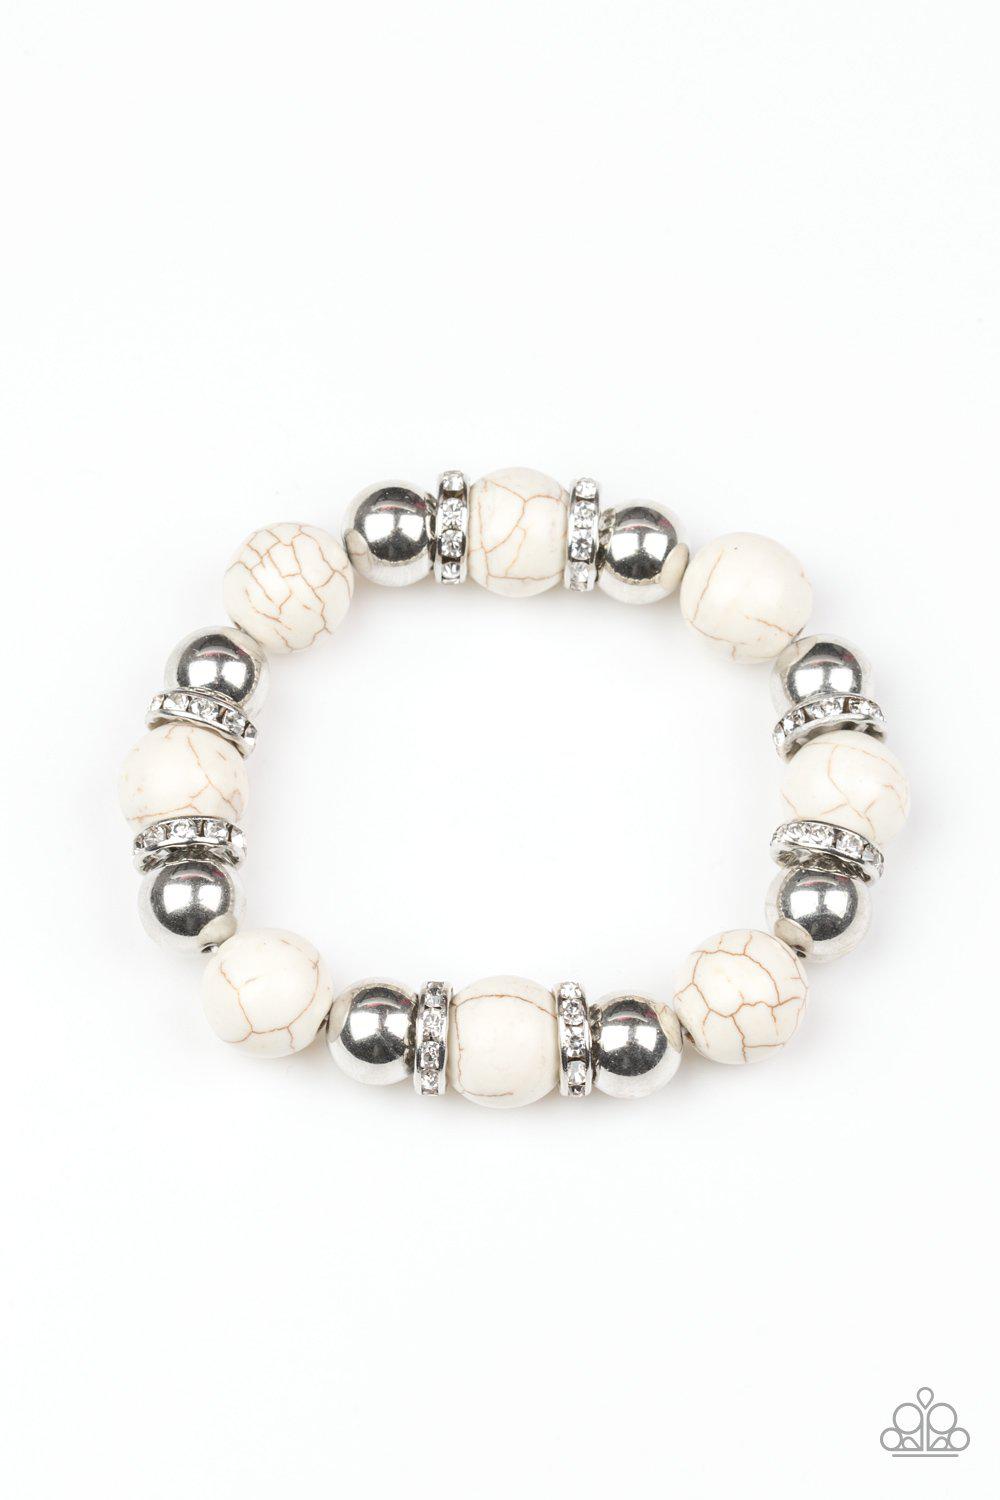 Ruling Class Radiance White and Silver Bracelet - Paparazzi Accessories-CarasShop.com - $5 Jewelry by Cara Jewels